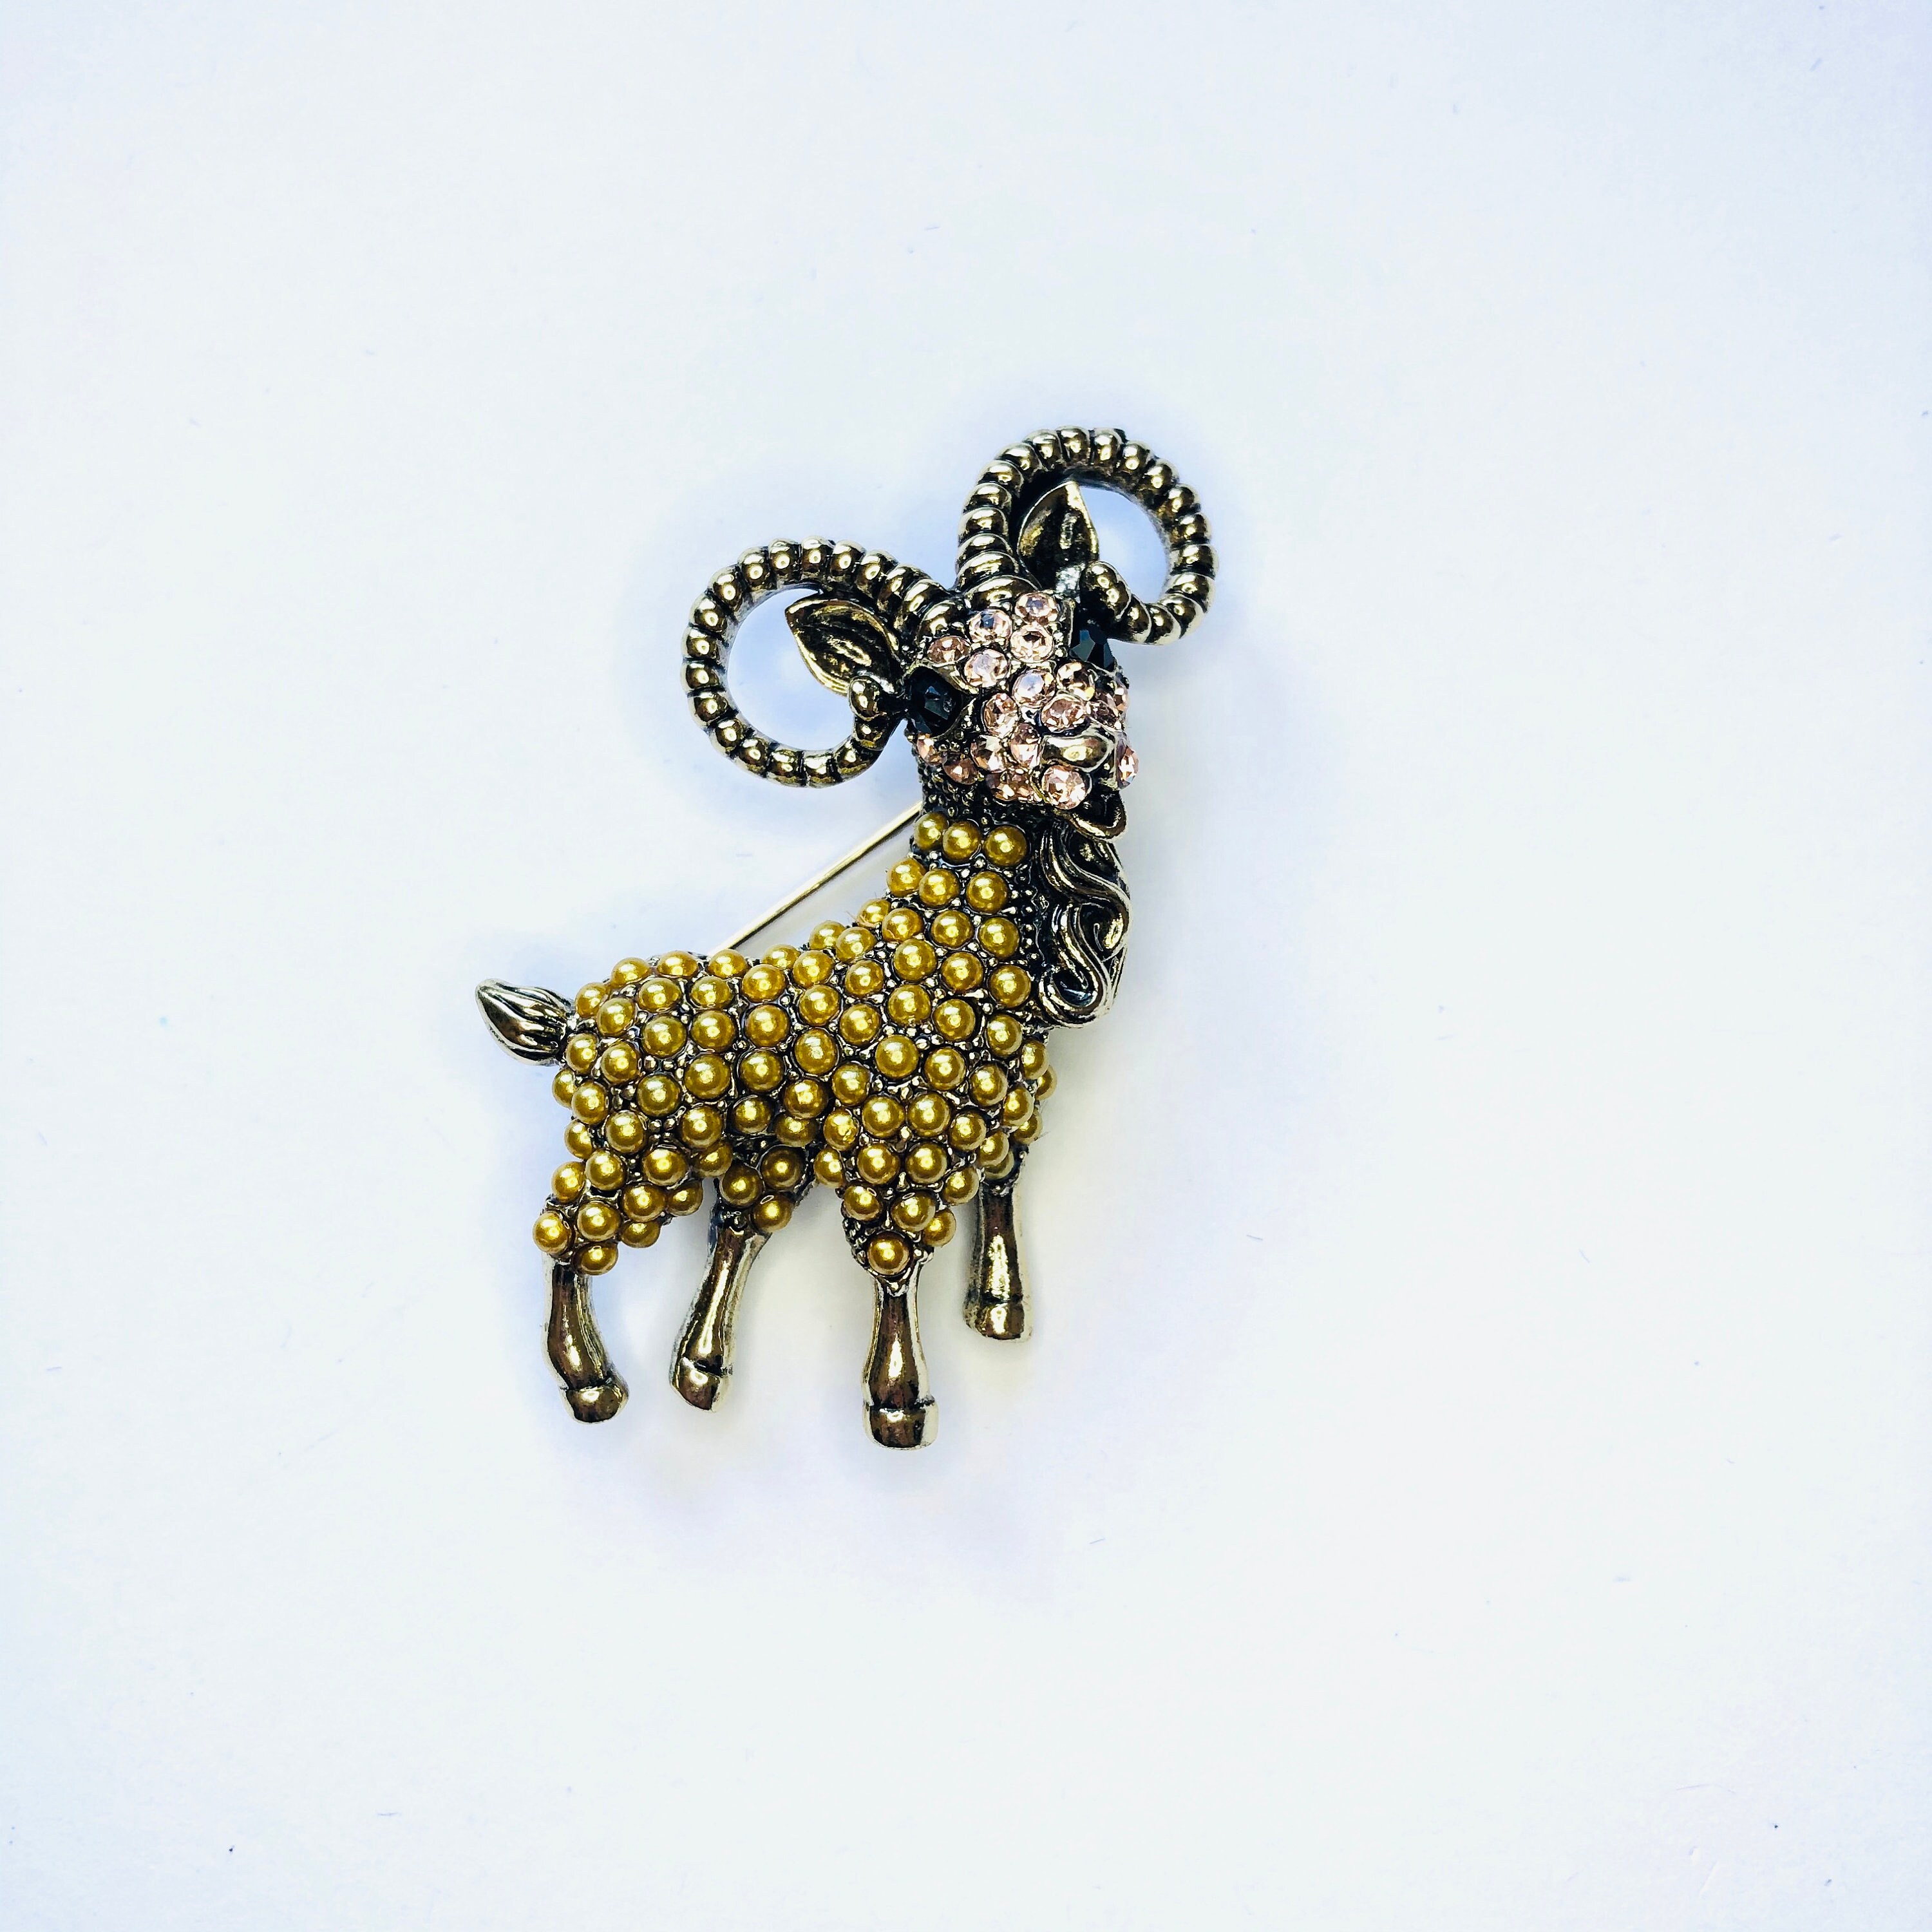 Adorable Vintage Gold-Tone Faux Pearls & Rhinestone Goat Ram Animal Brooch Pin A1195